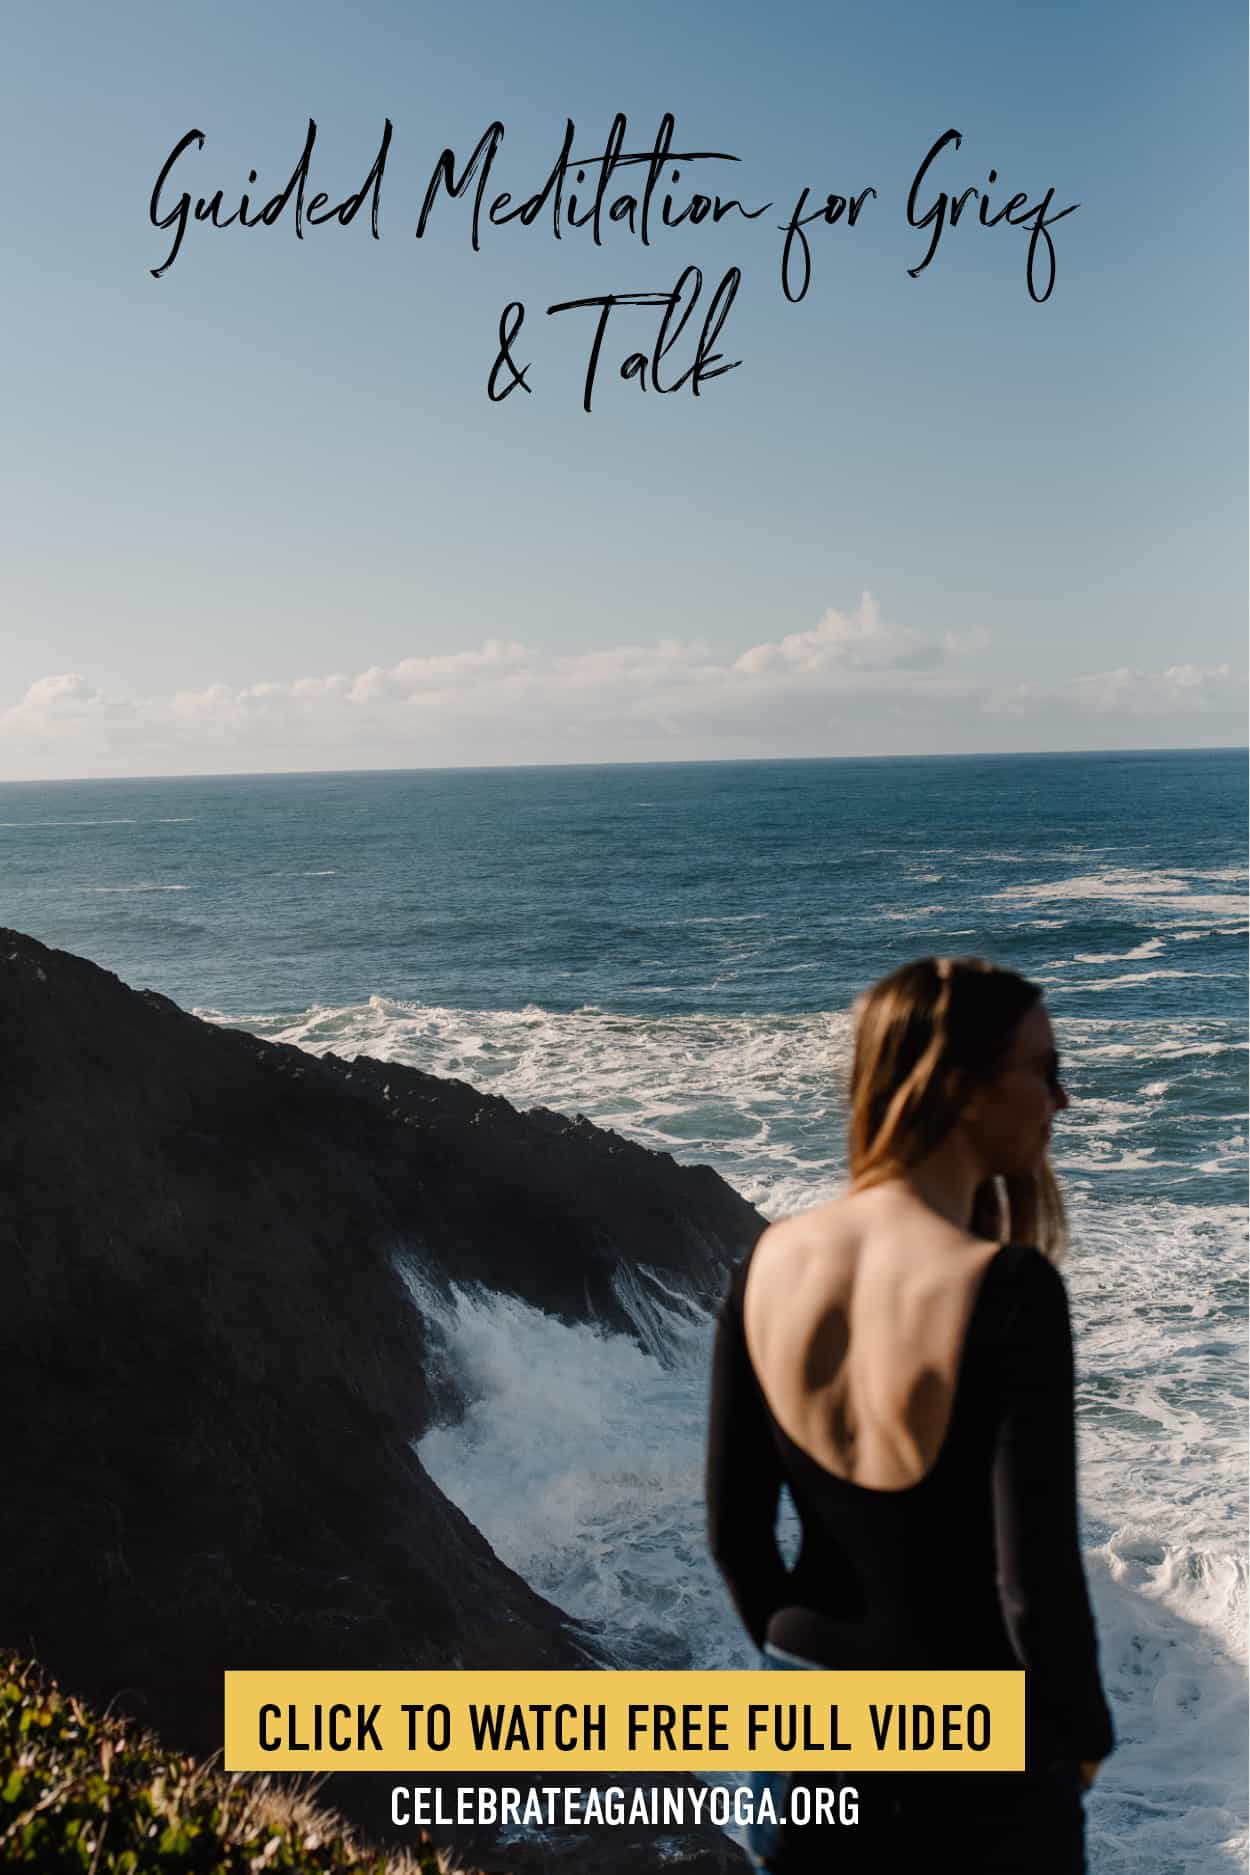 "guided meditation for grief and talk click to watch video" woman standing on edge of a cliff at beach